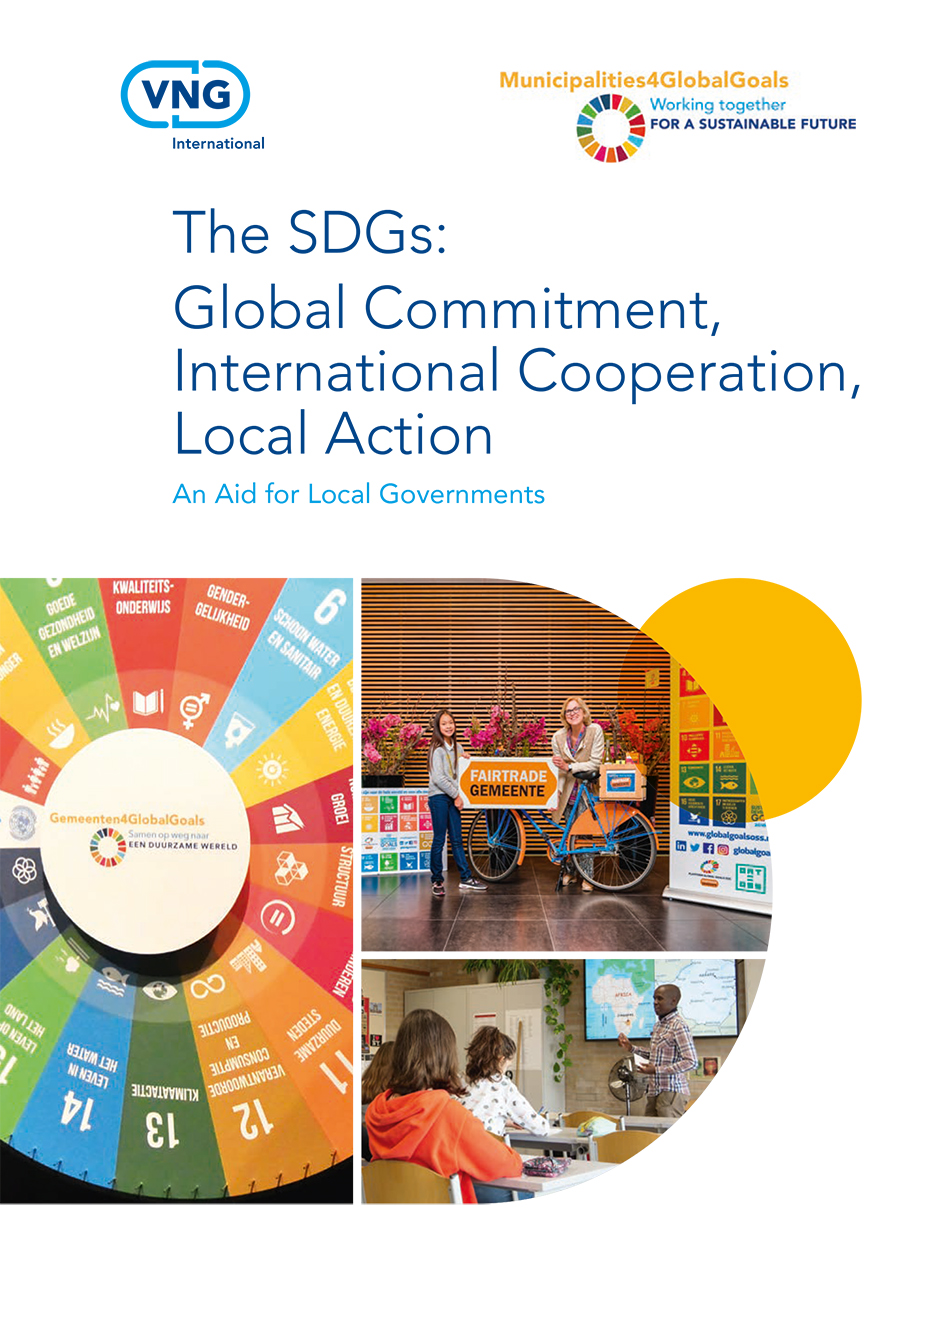 The SDGs: Global Commitment, International Cooperation, Local Action | An Aid for Local Governments